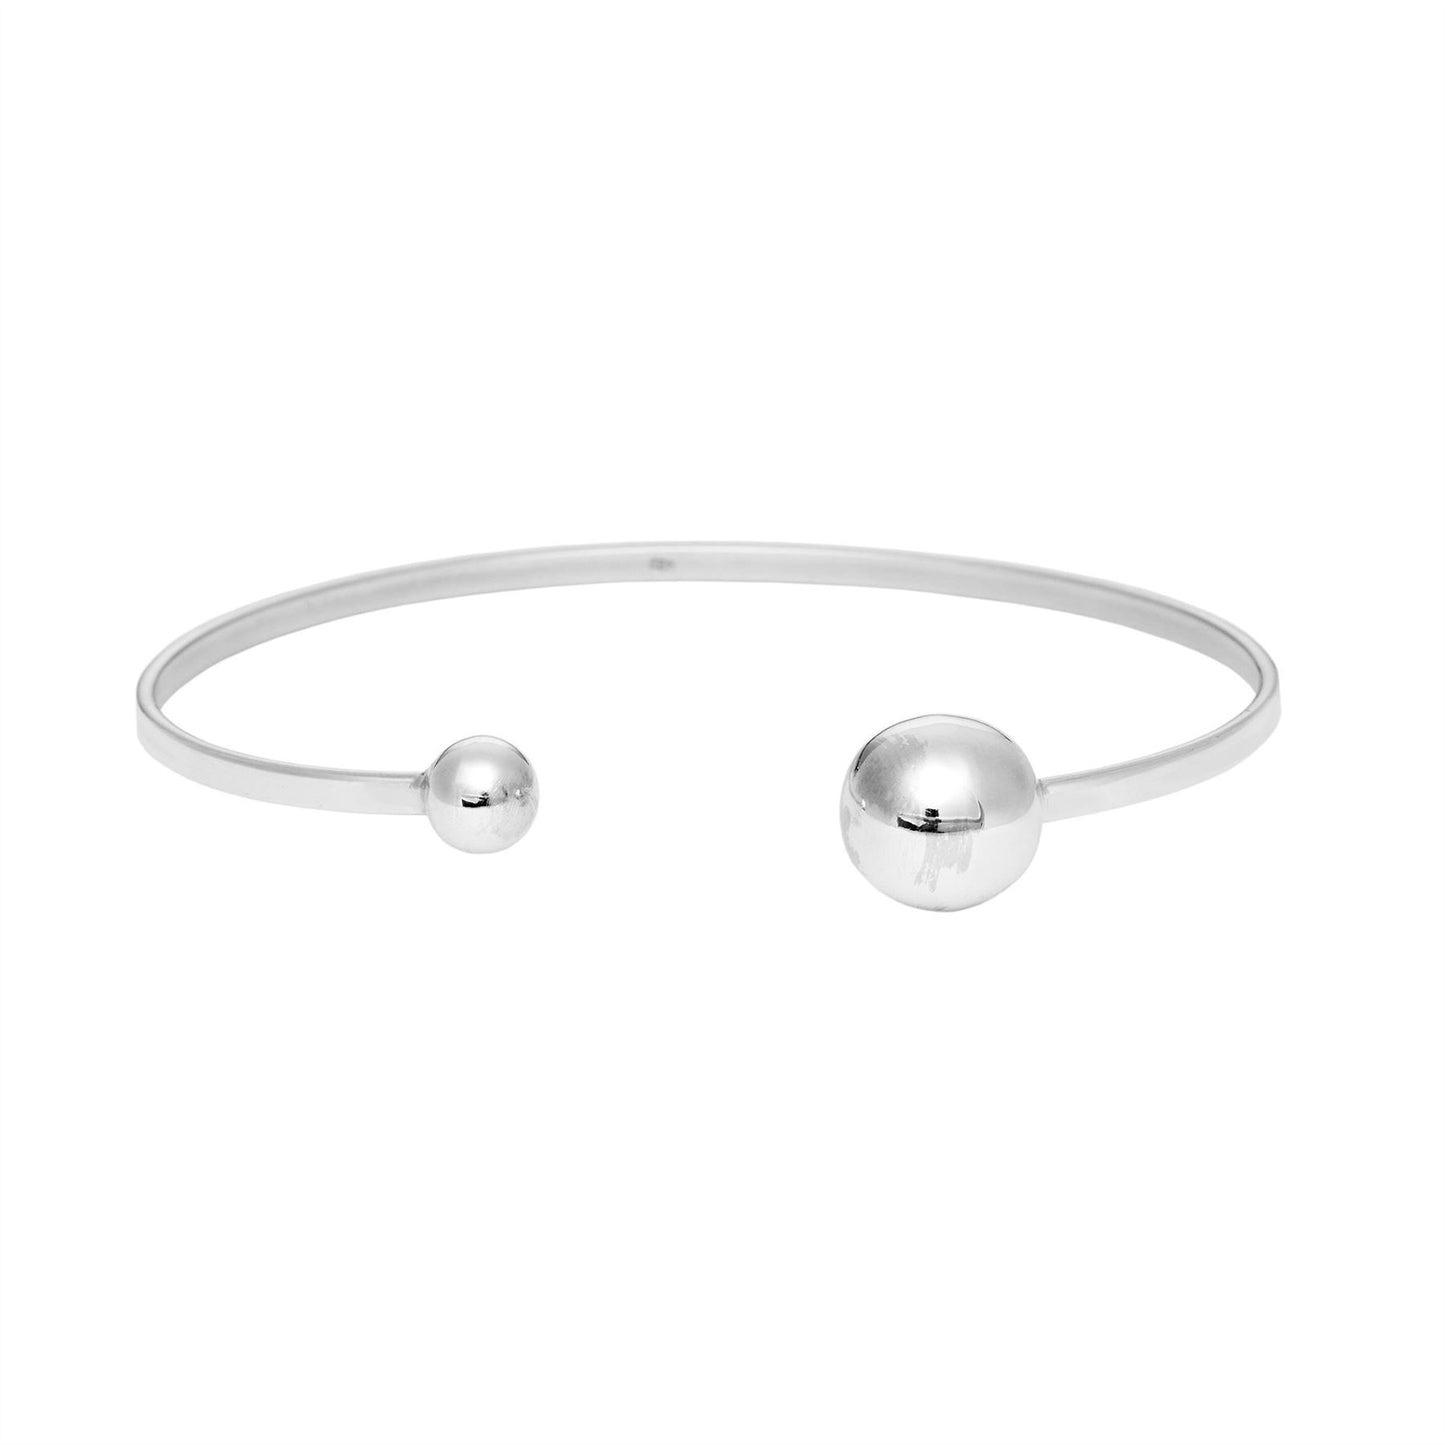 Sterling Silver Torque Adjustable Thin Bangle Bracelet - Silverly